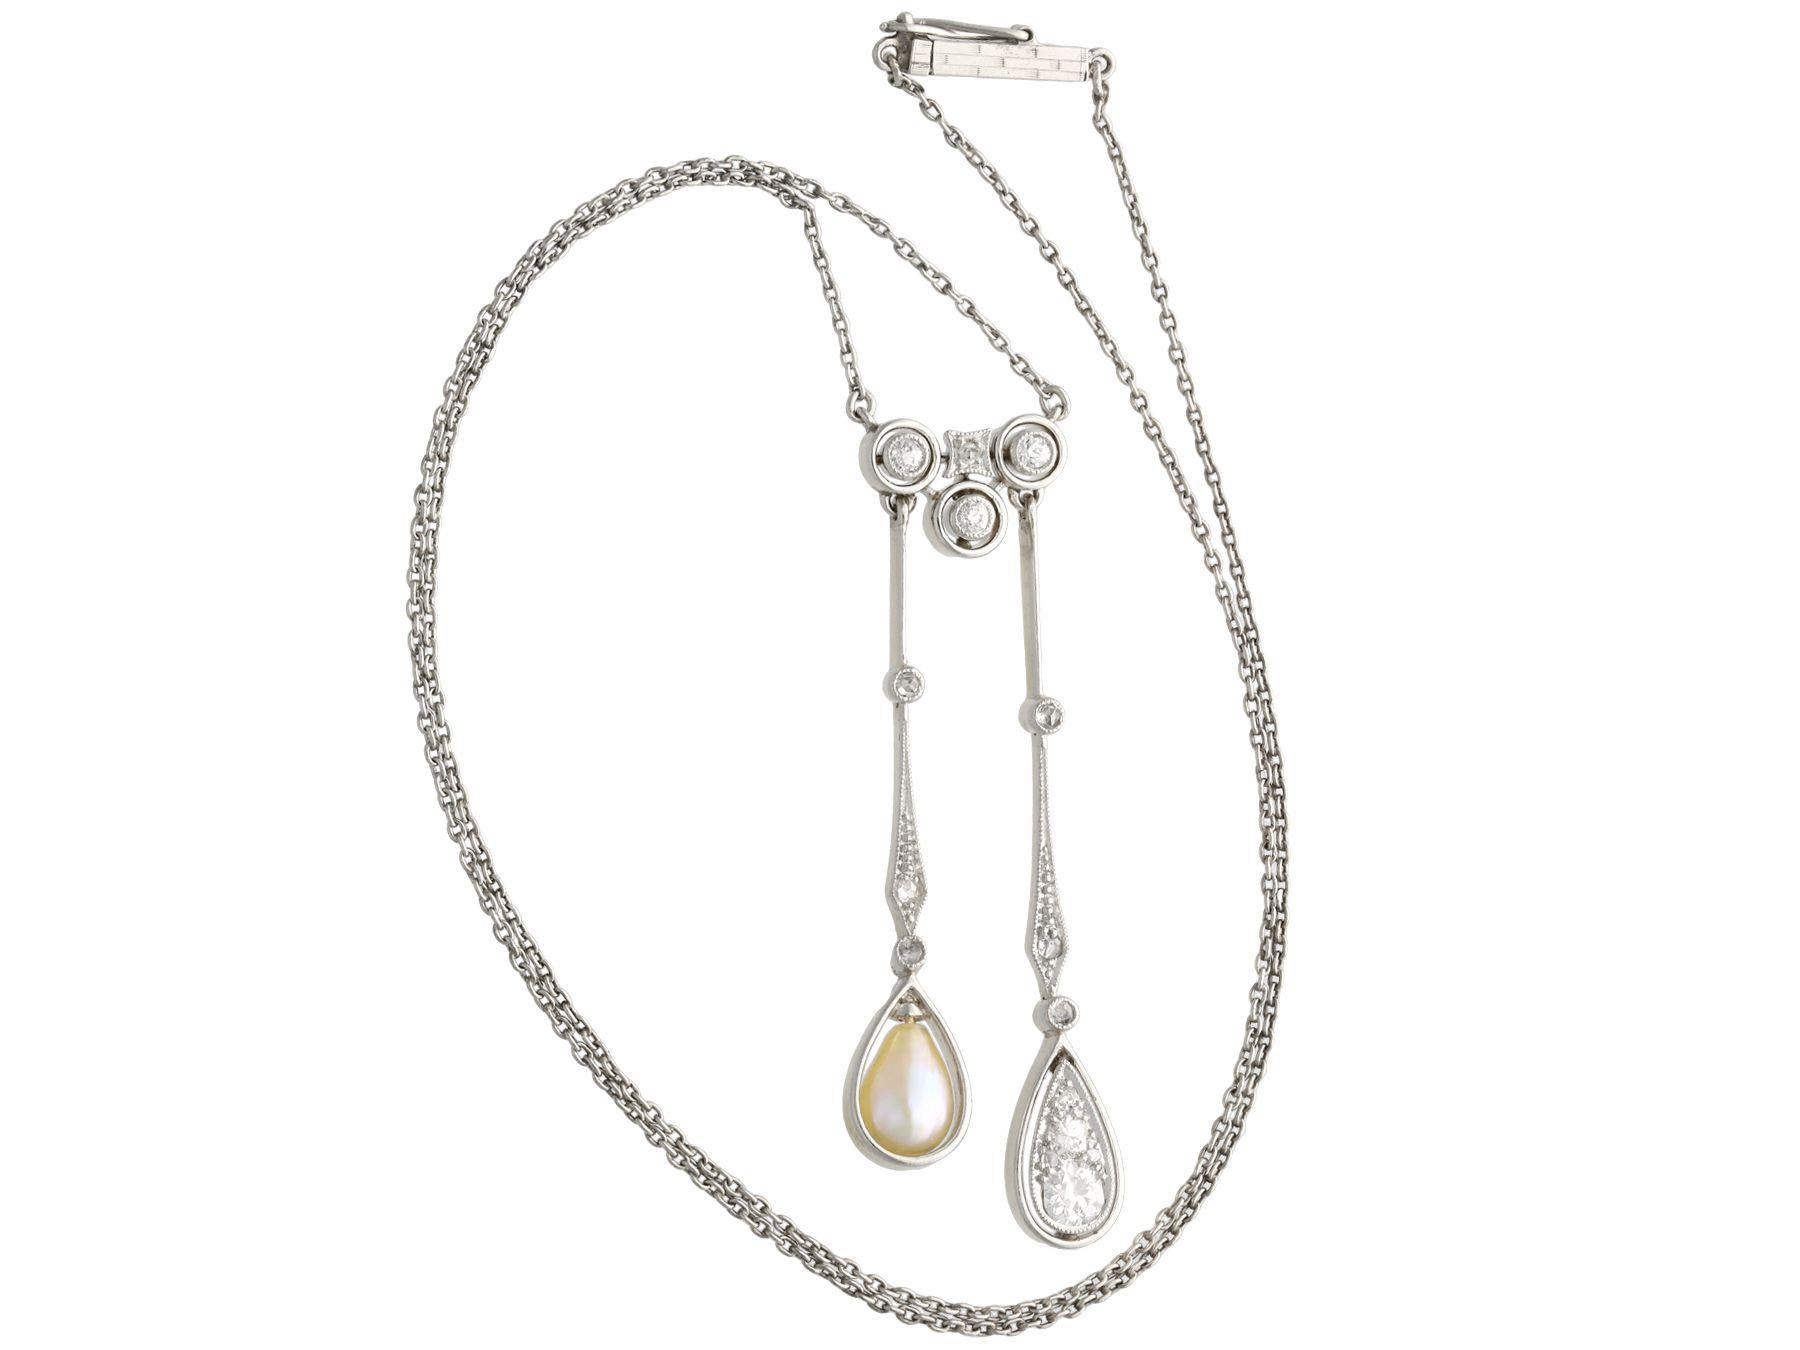 A stunning antique 0.37 carat diamond and pearl, 14 karat yellow gold and platinum gold set pendant; part of our diverse antique jewelry collections.

This stunning, fine and impressive antique diamond and pearl pendant has been crafted in 14k